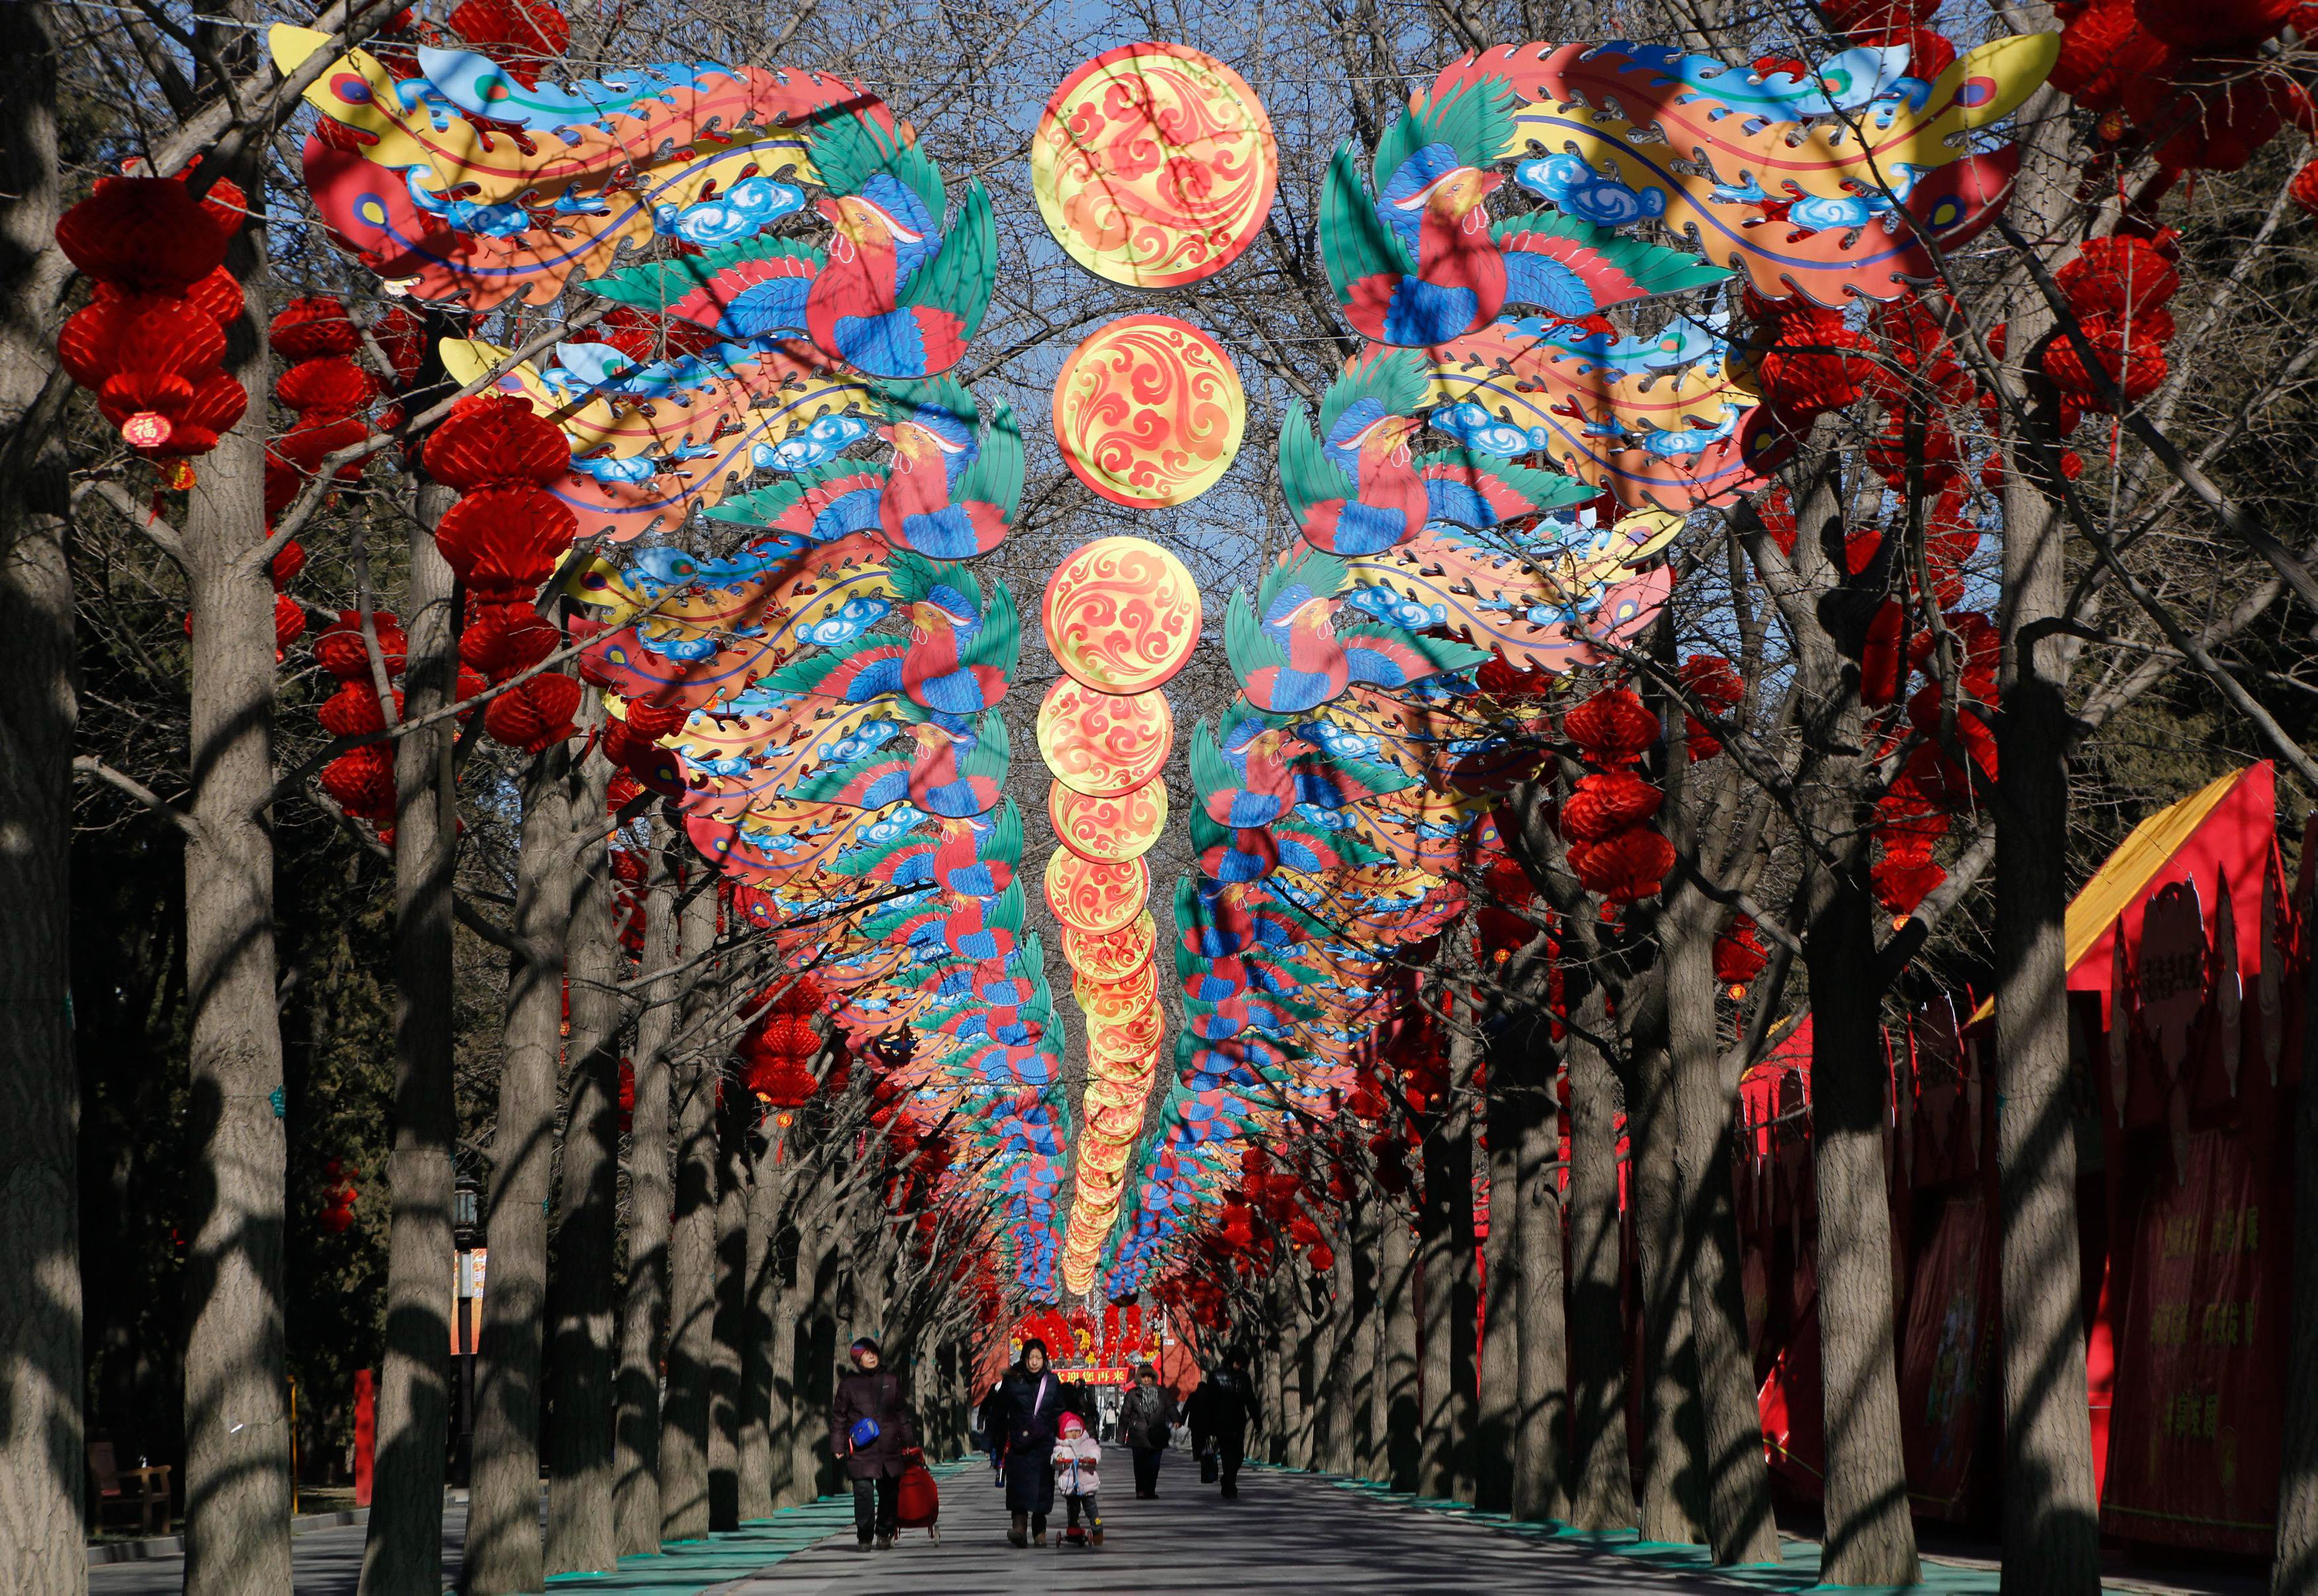 Visitors walk beneath decorations set up for the upcoming Spring Festival celebrations in Ditan Park